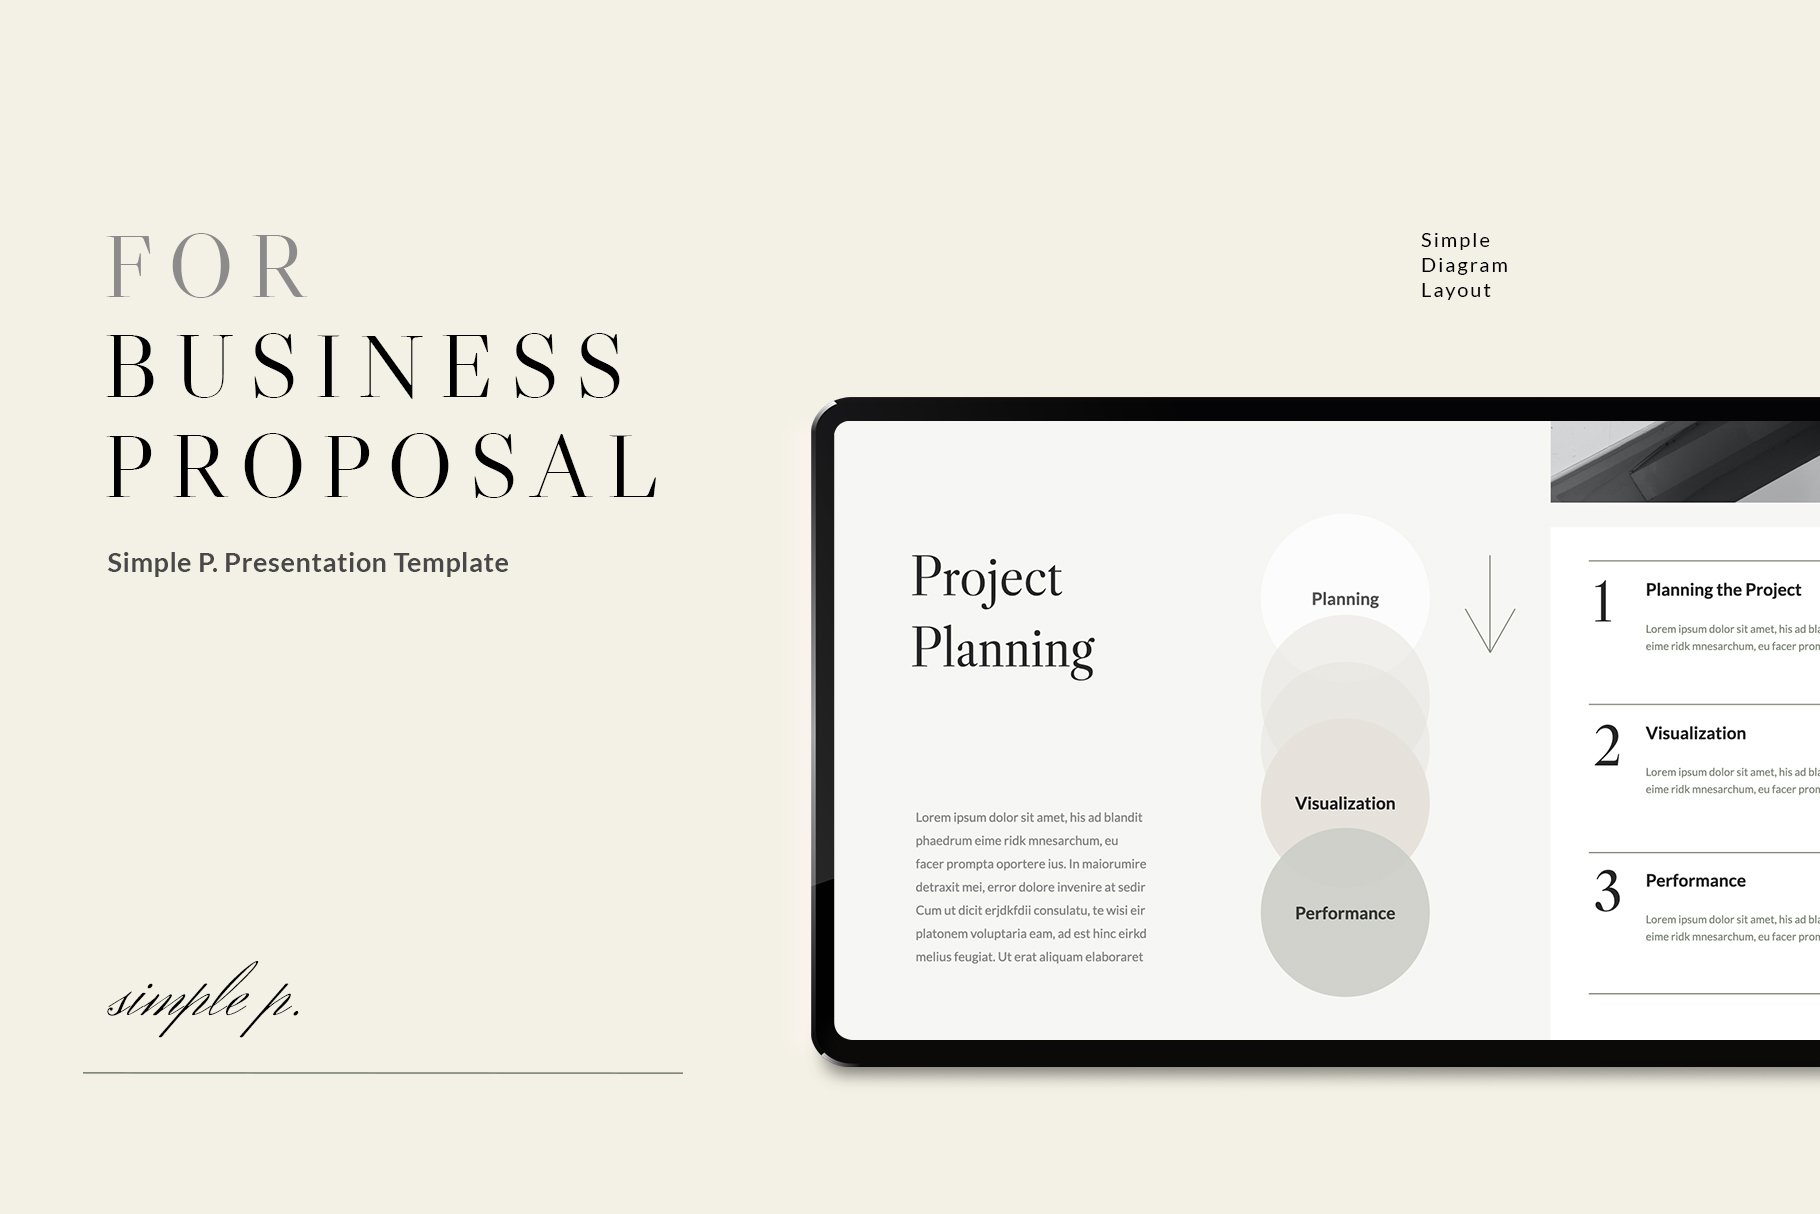 Proposal Presentation Template preview image.